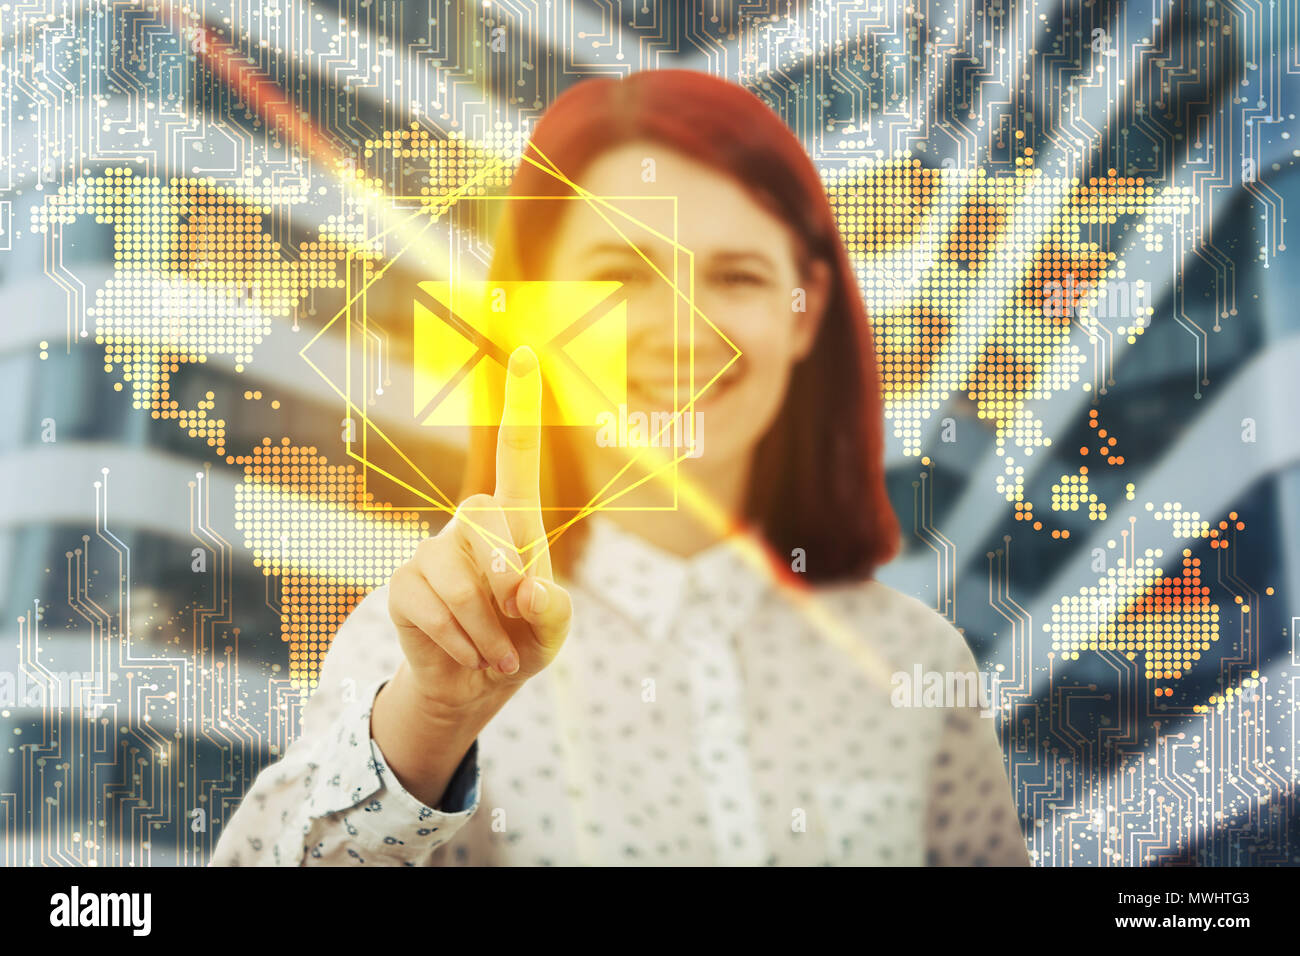 Smiling woman touching digital screen interface. Press on the golden envelope message icon over world map hologram background. Modern technology conce Stock Photo